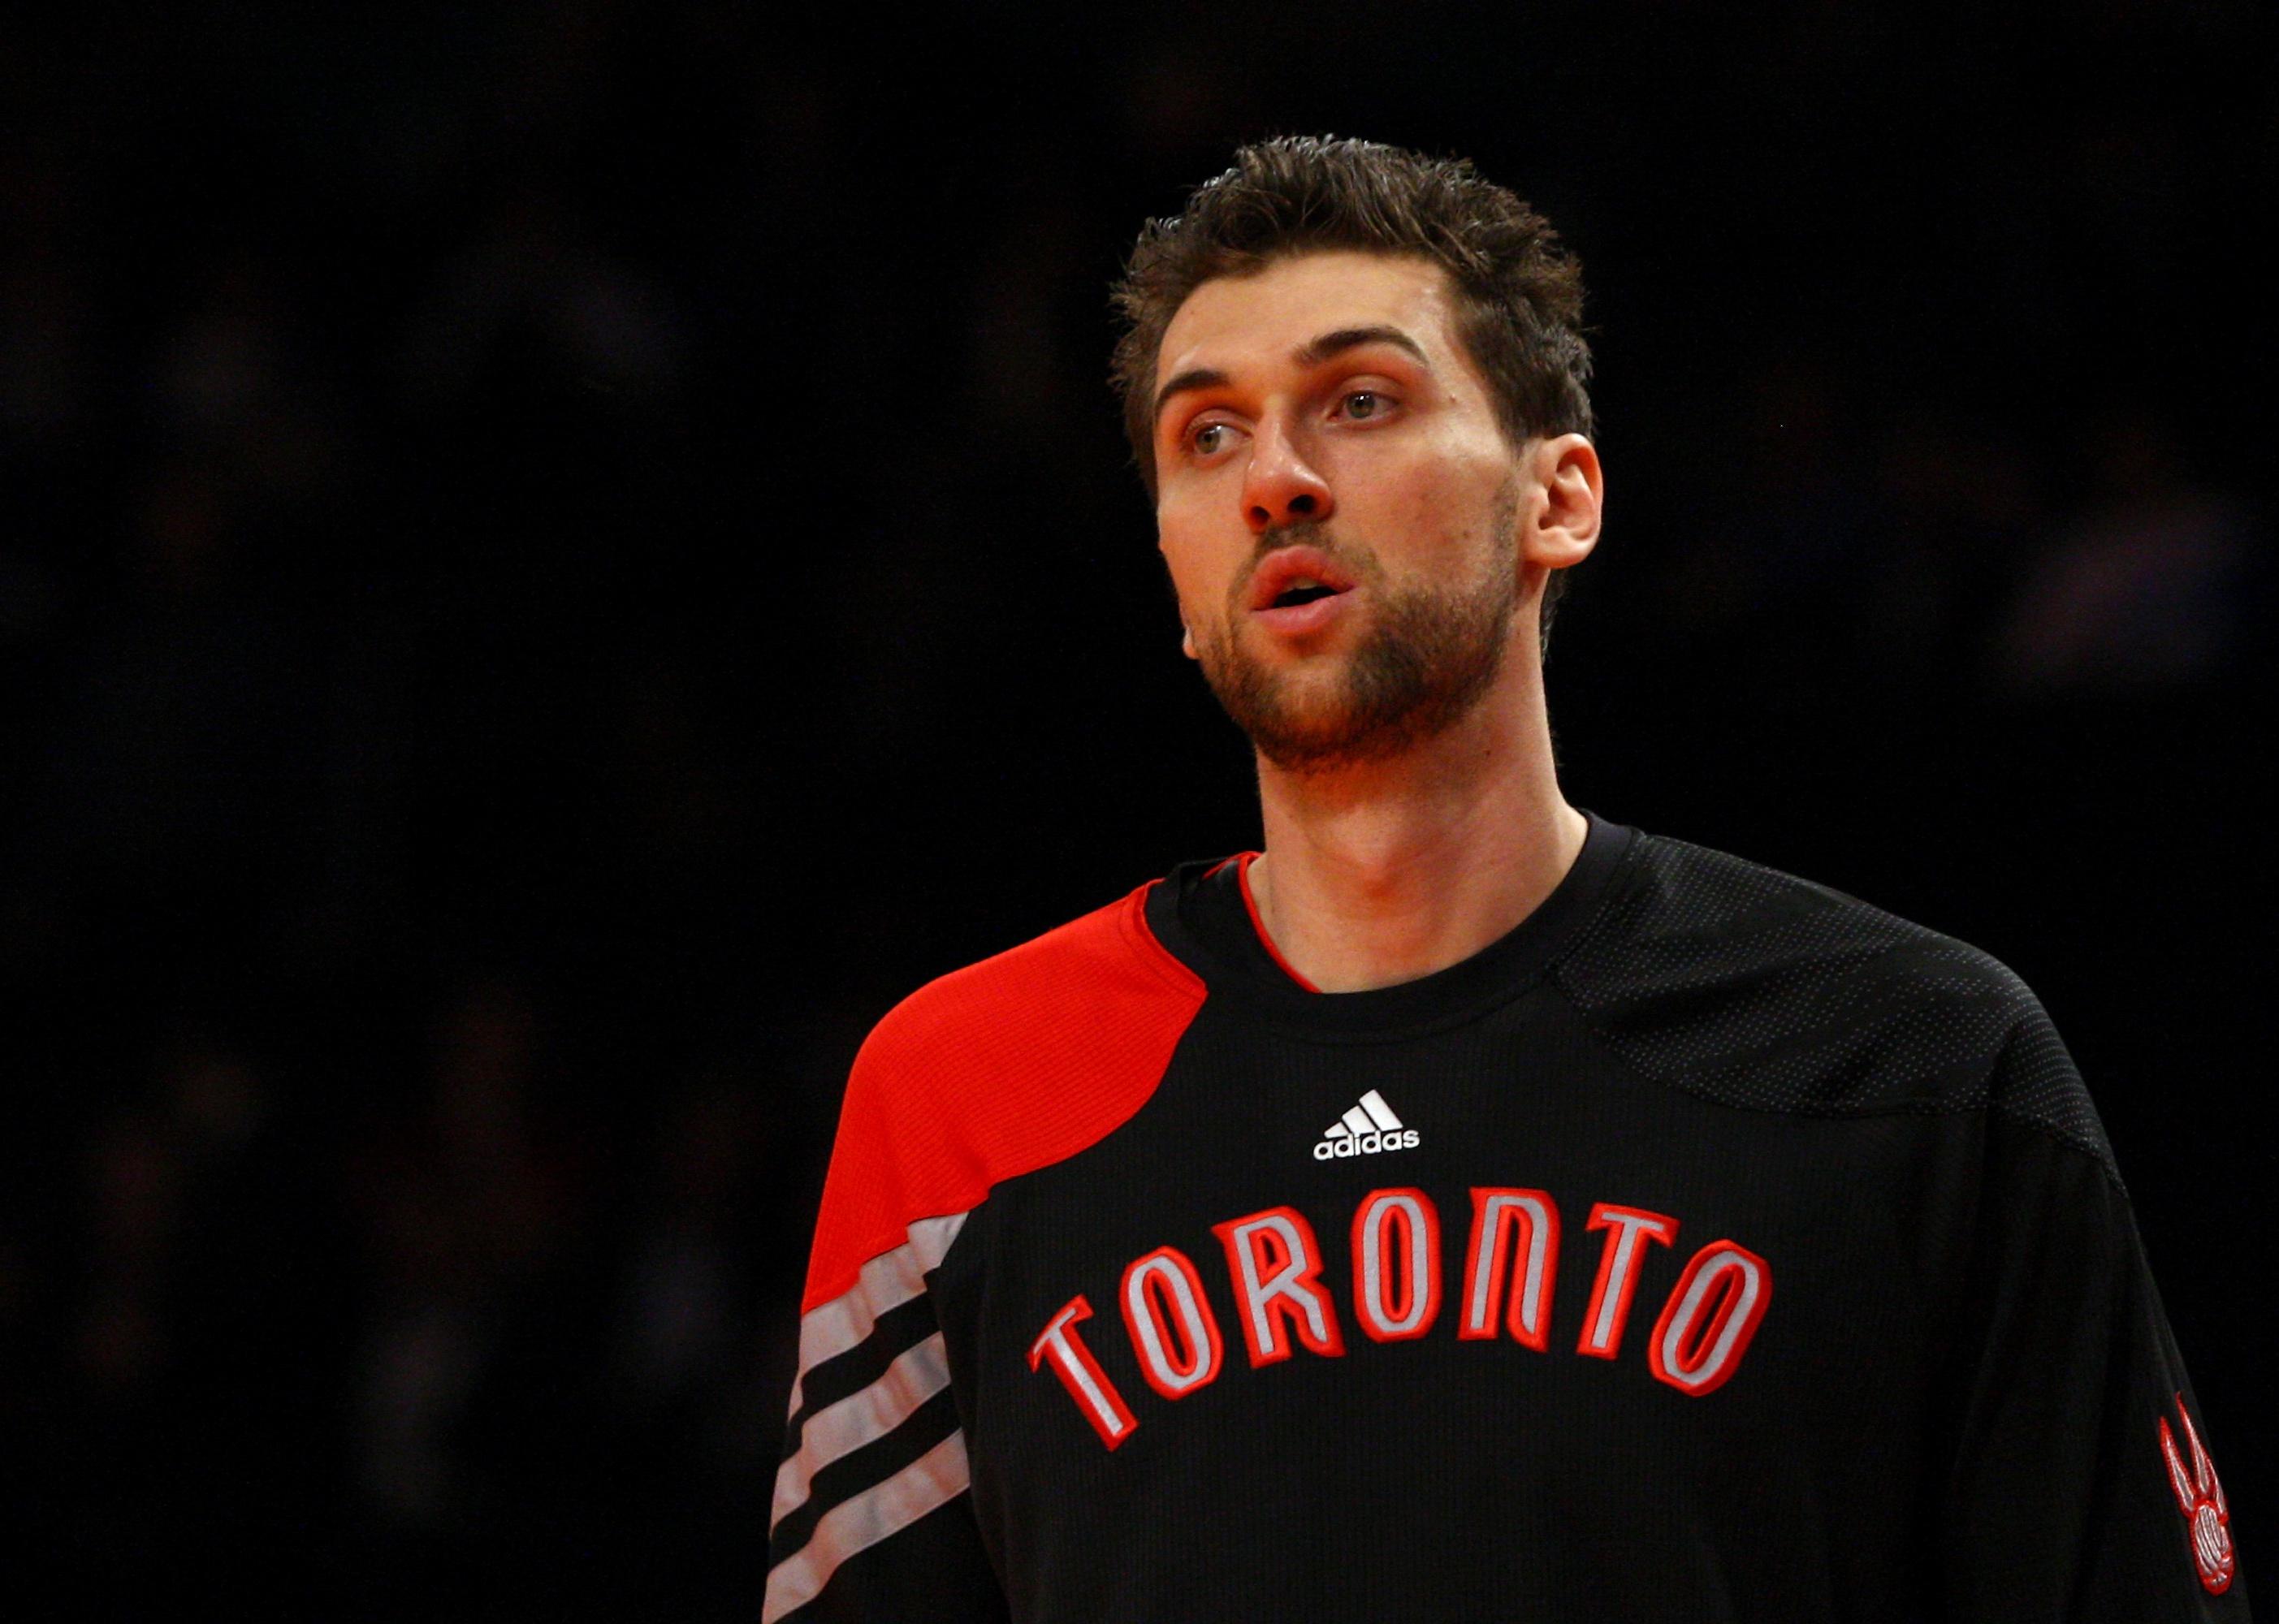 Andrea Bargnani during warm up at Madison Square Garden.